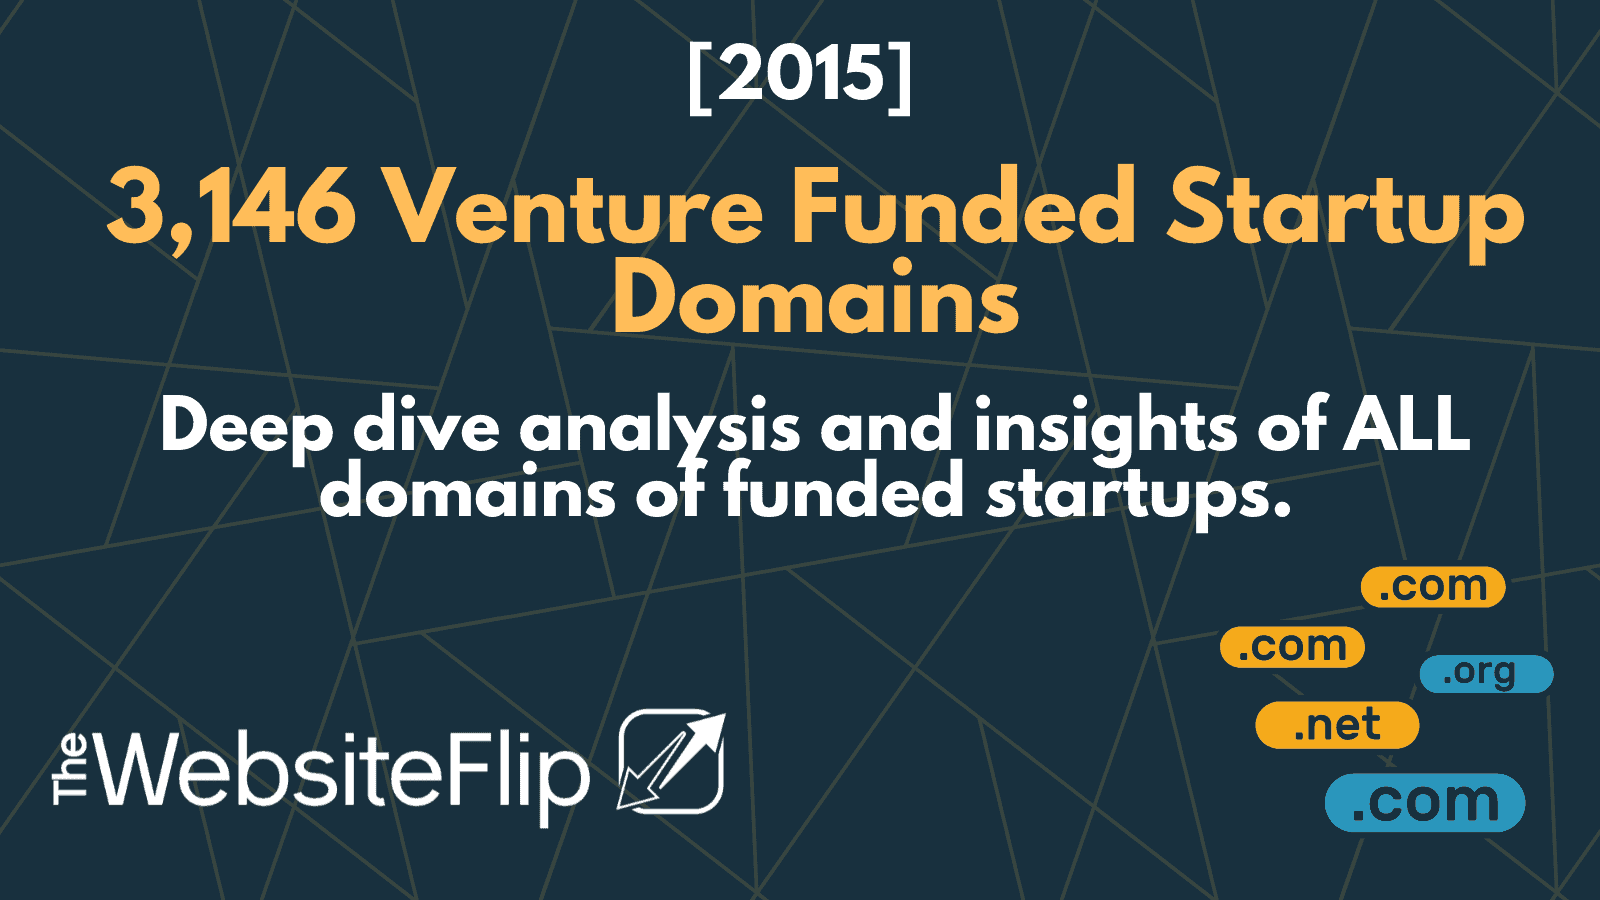 Newly funded startups and their domains in 2015